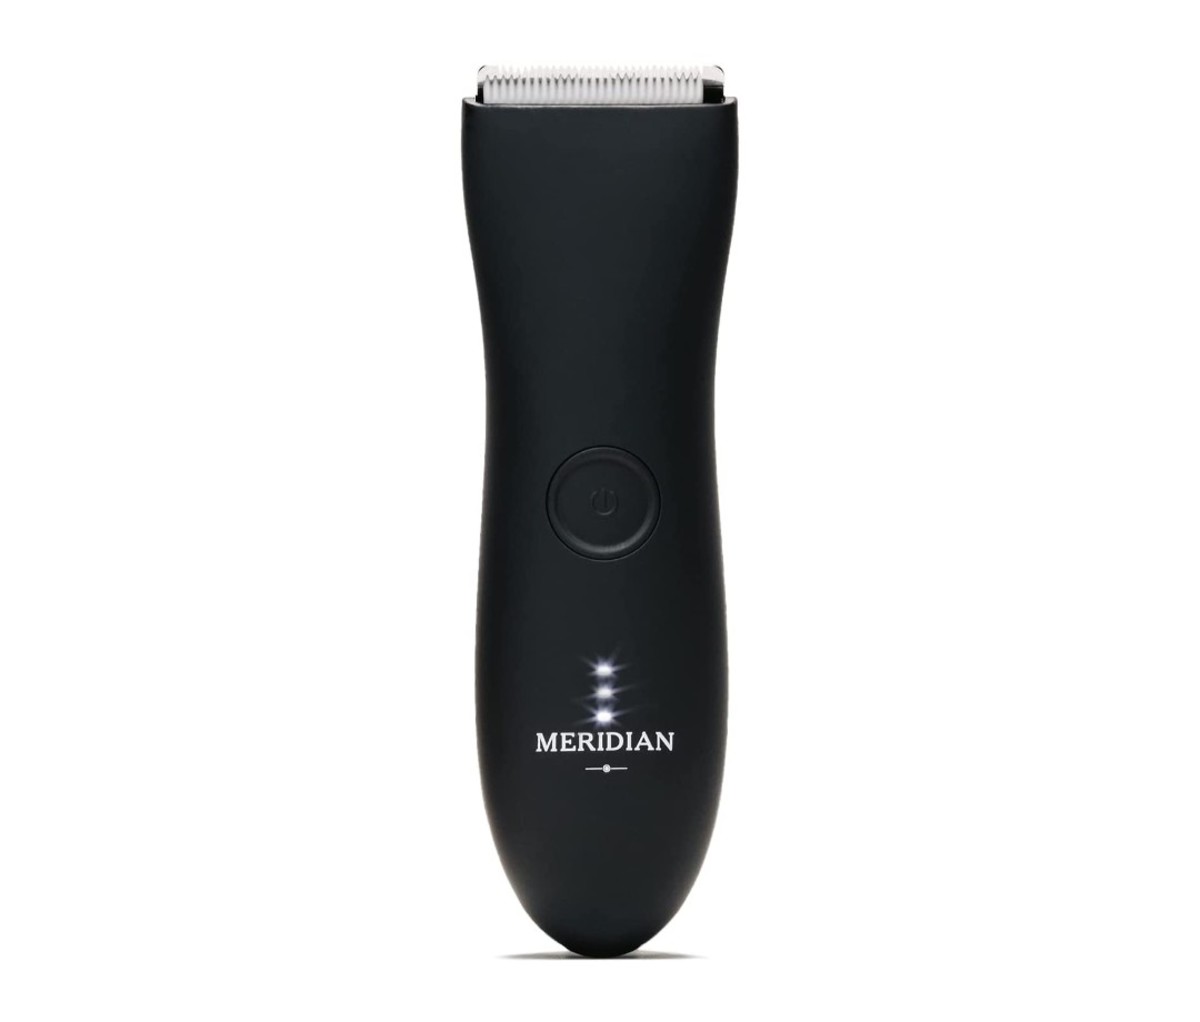 The Trimmer by Meridian